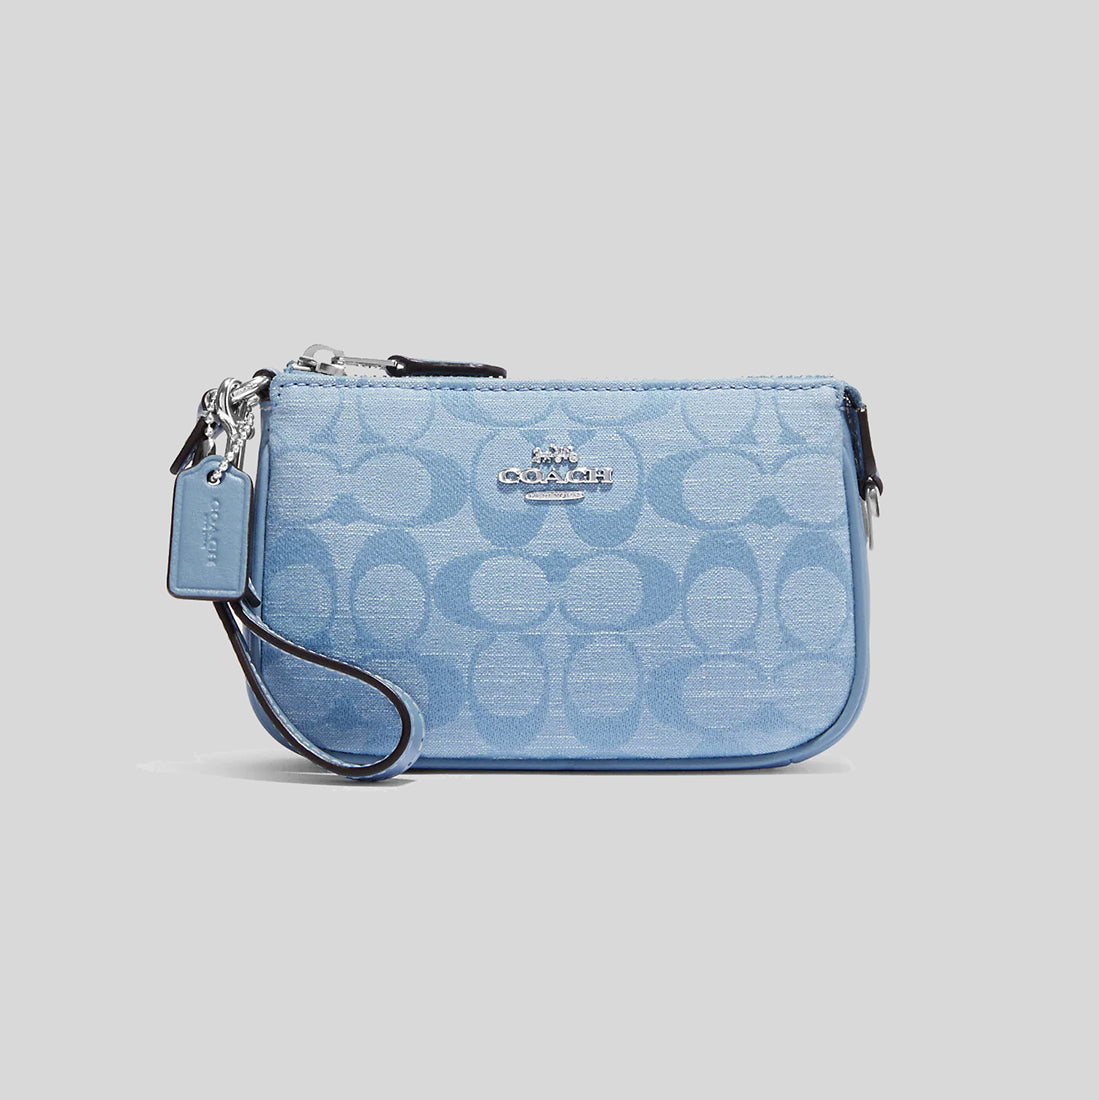 Coach Outlet Nolita 15 In Signature Chambray in Blue